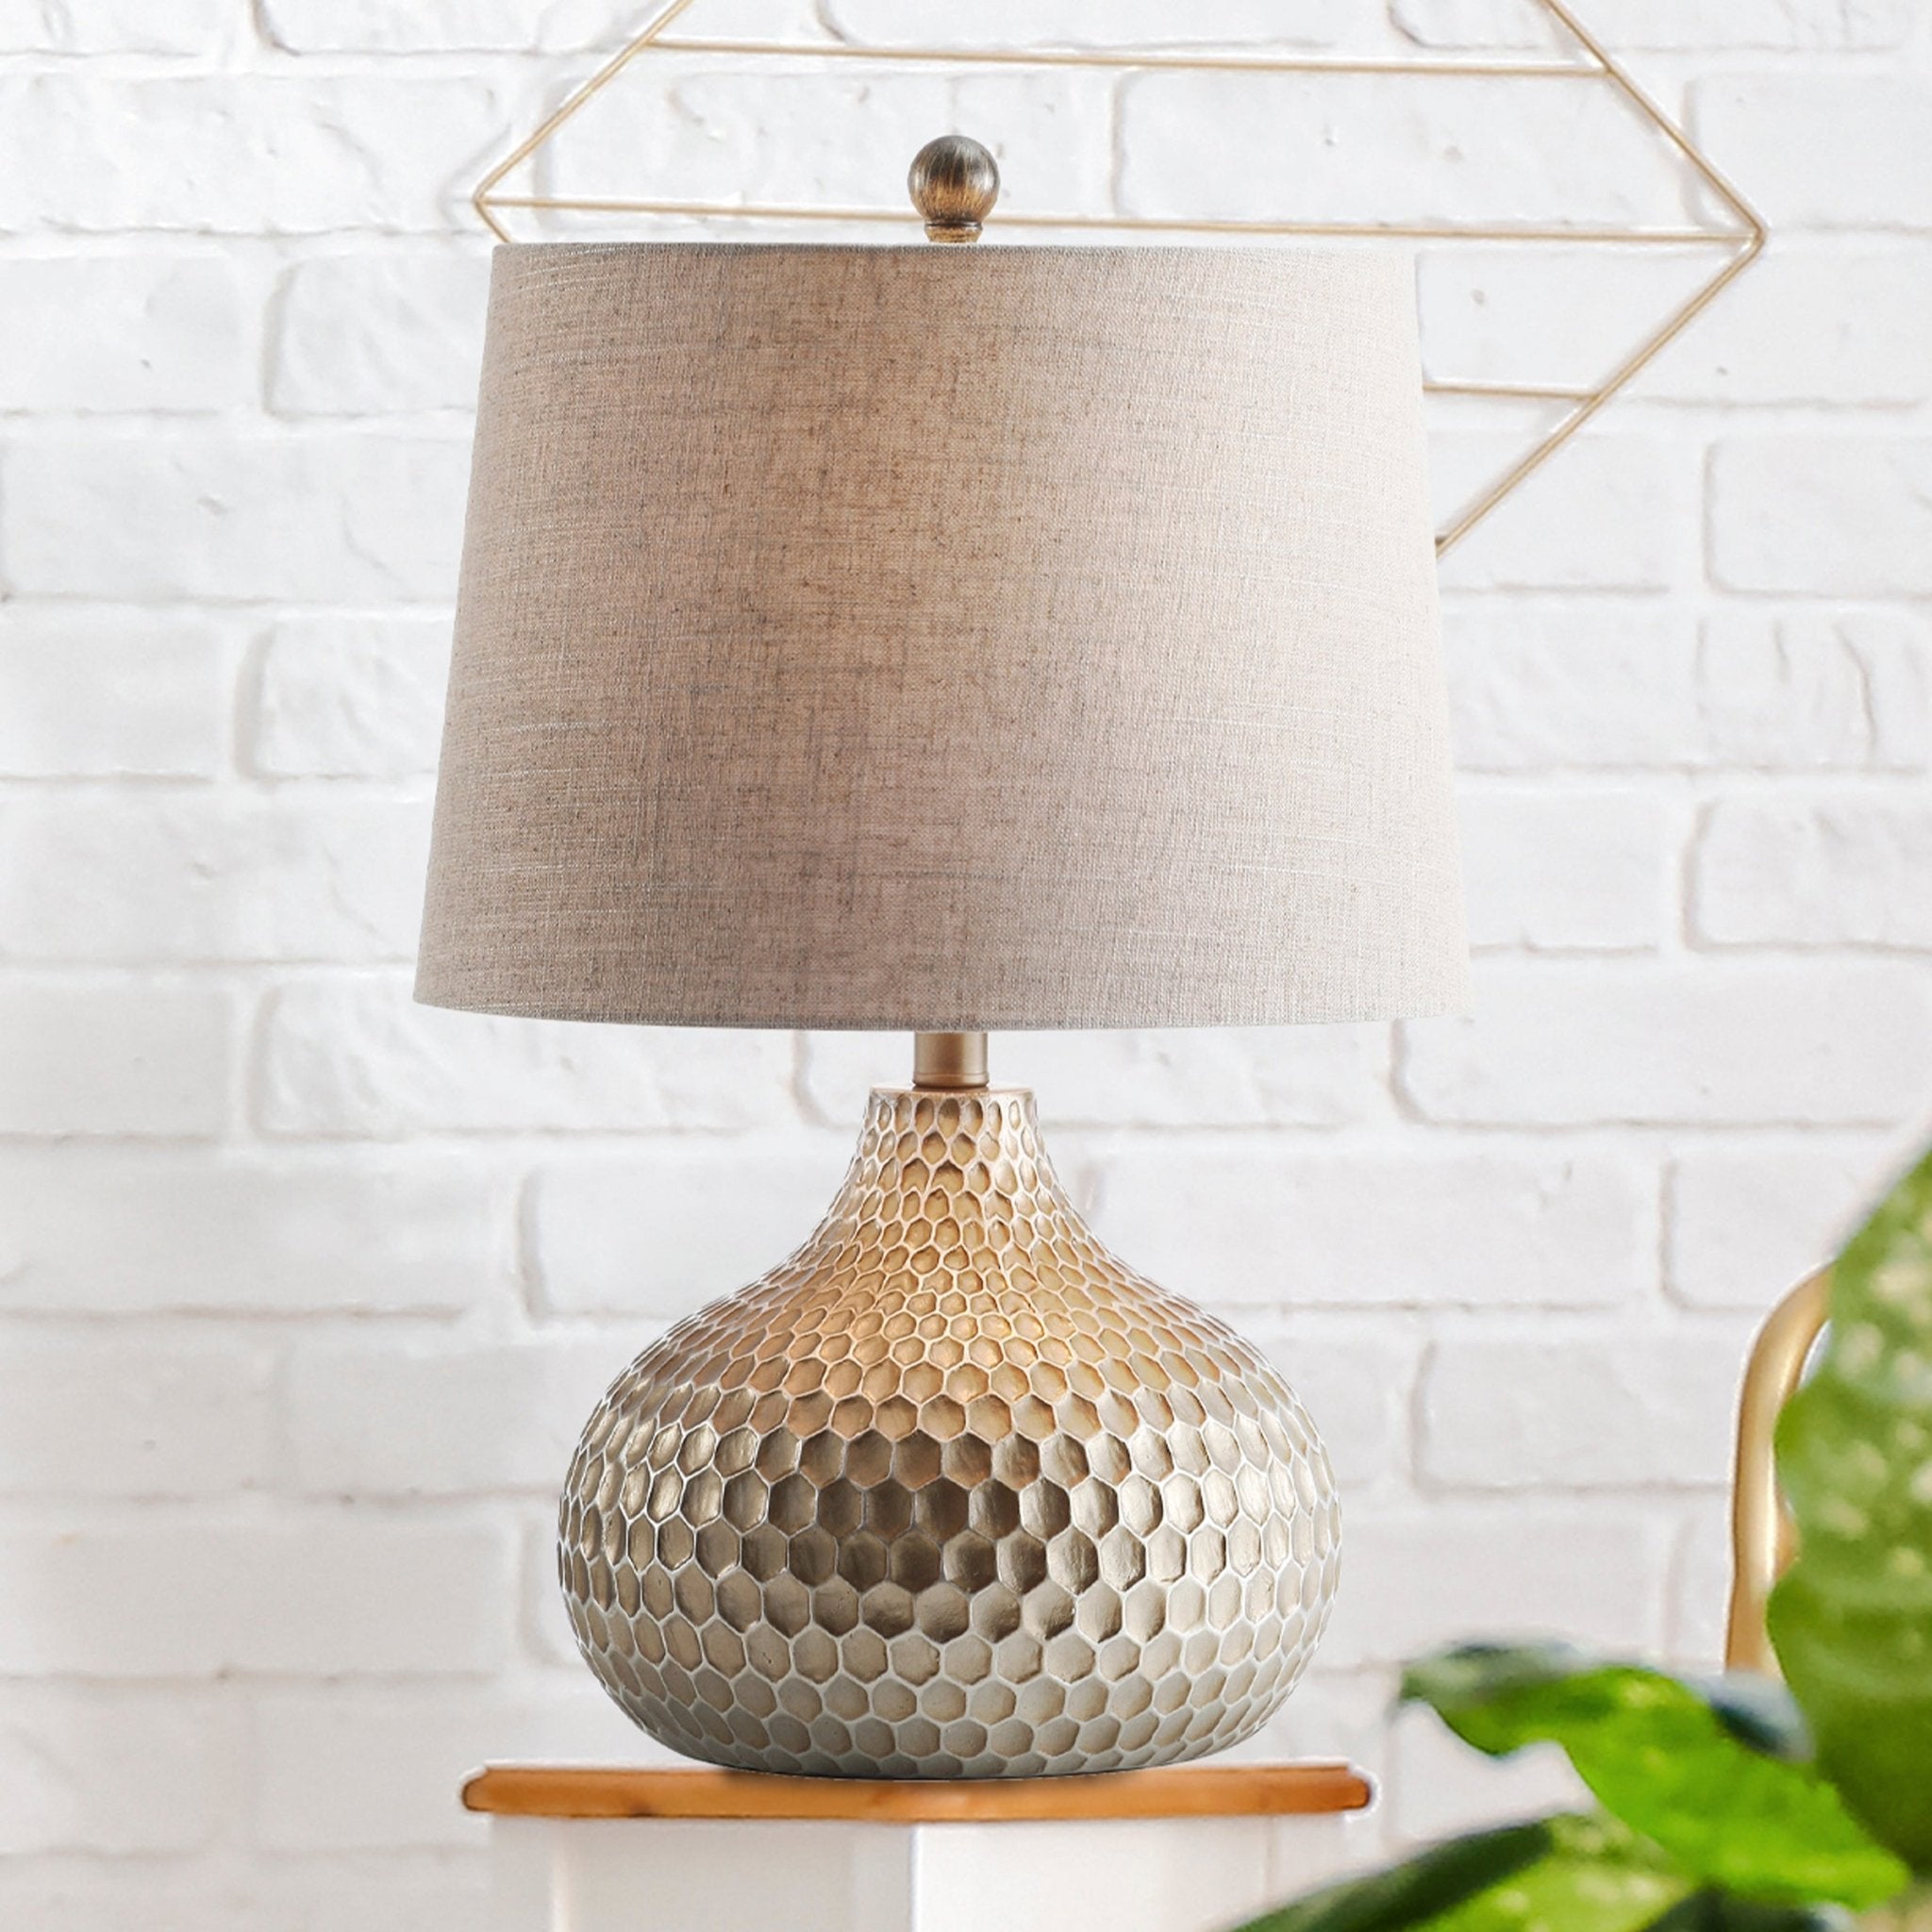 Bates-Honeycomb-LED-Table-Lamp-Table-Lamps